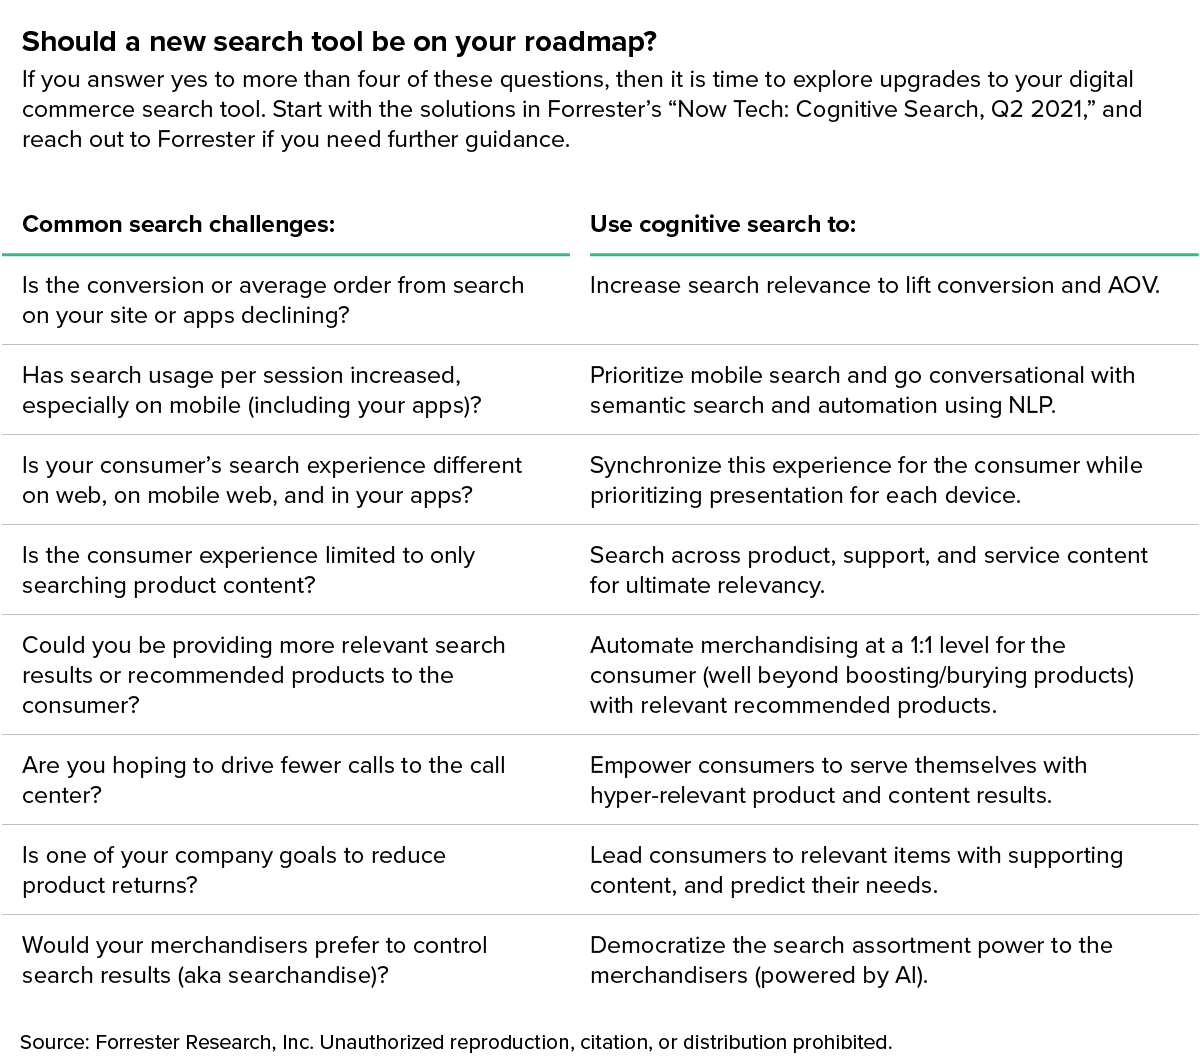 Searching for ROI in retail: The time for a new site search tool is now